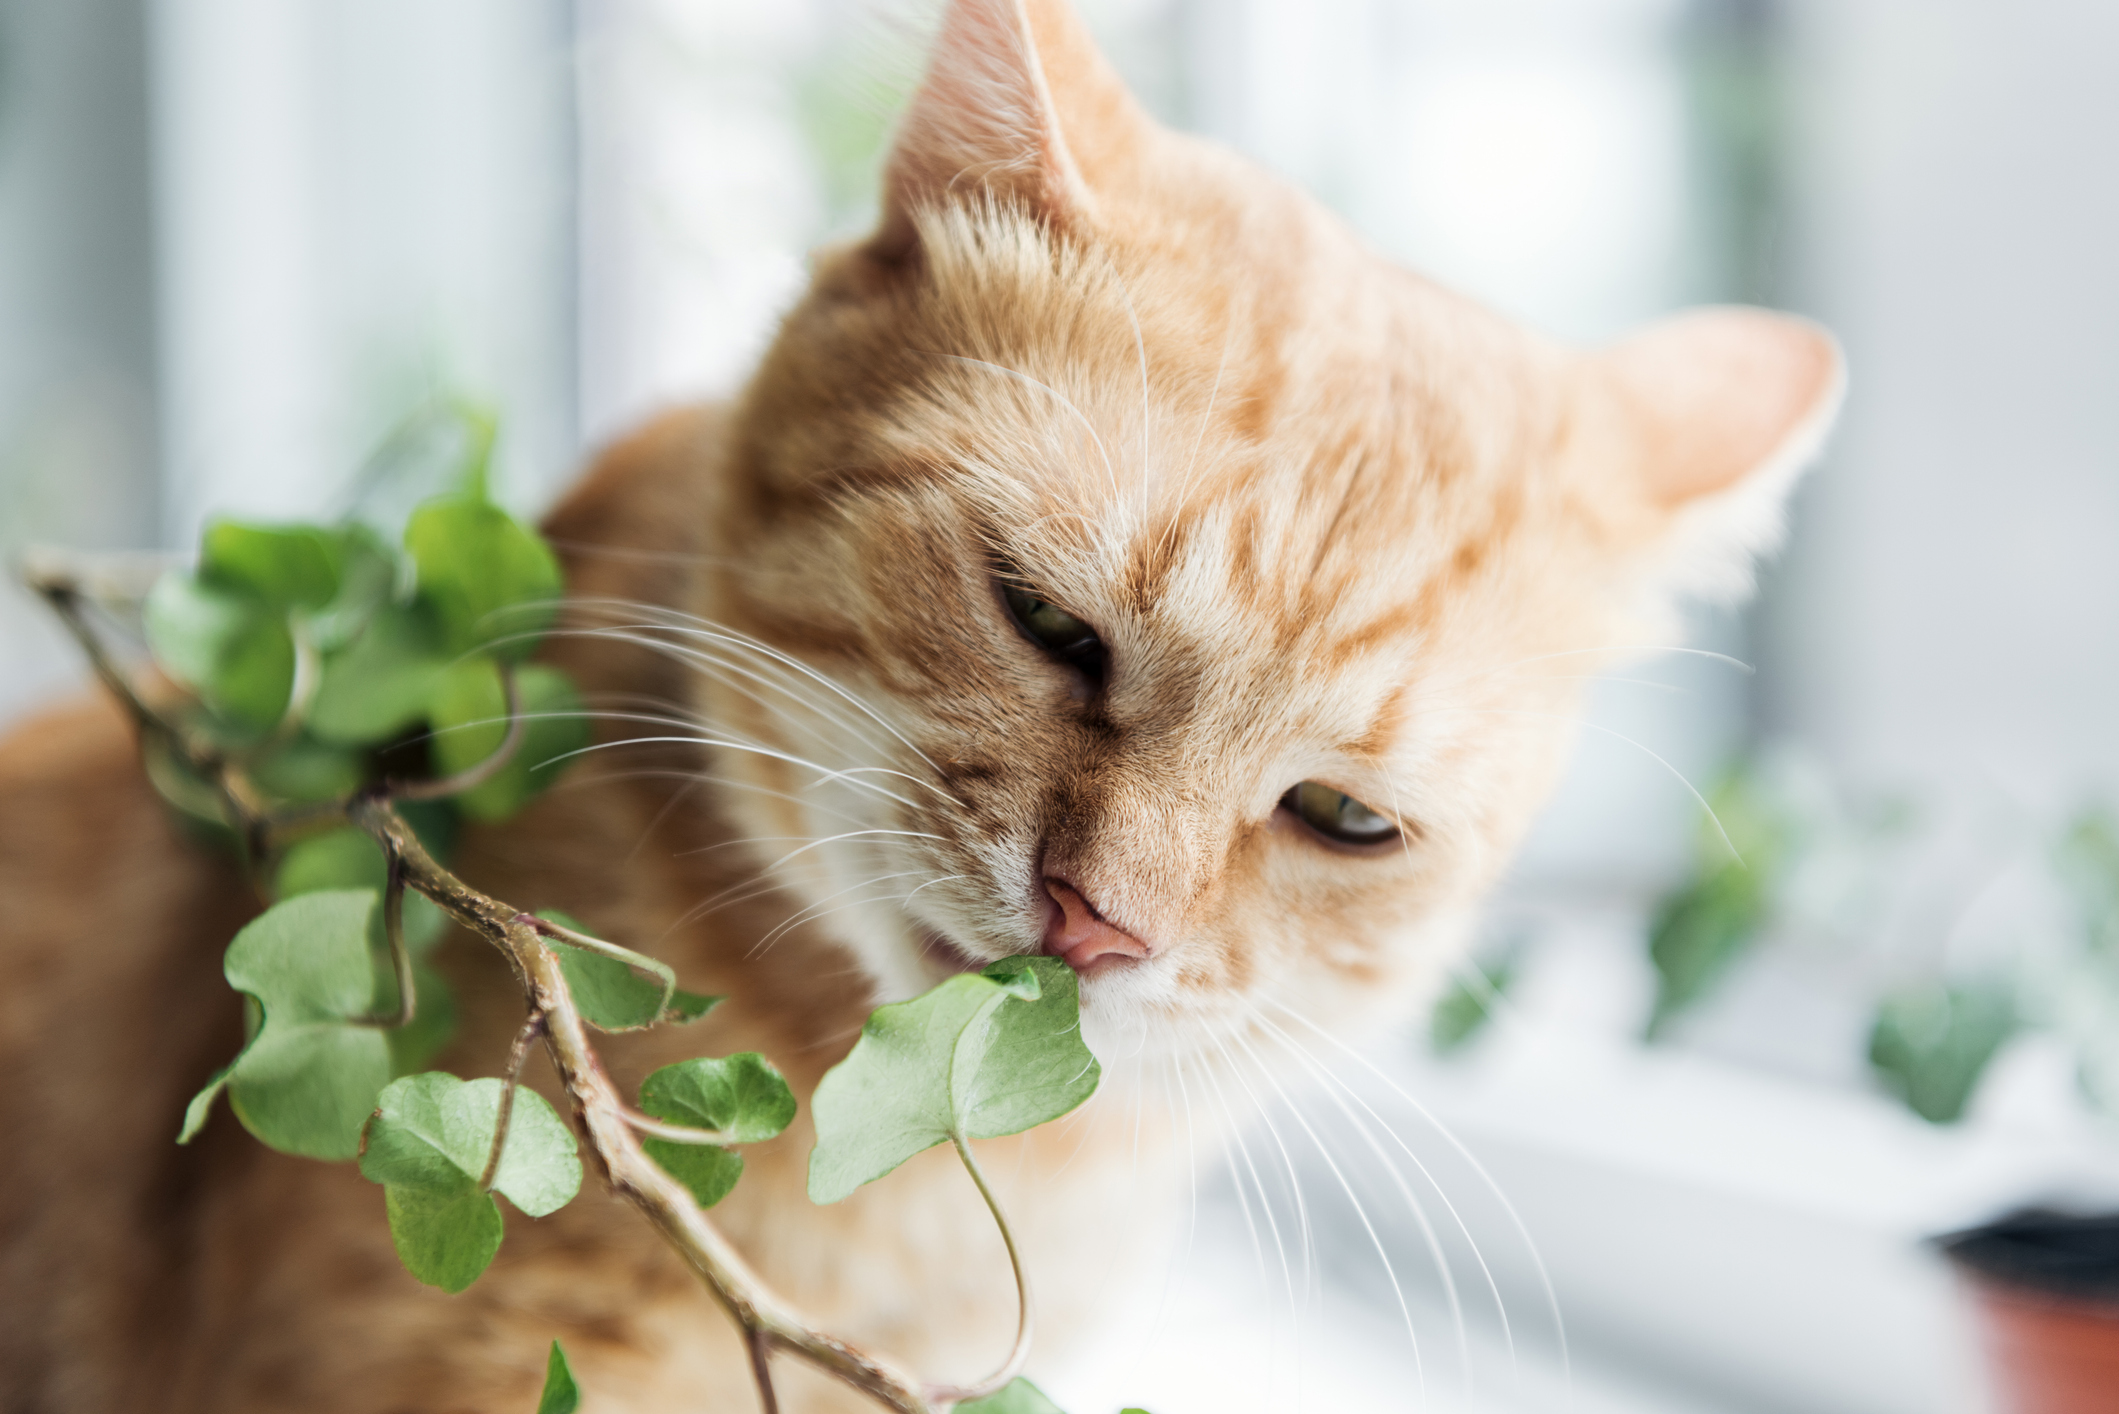 close-up view of cute red cat eating green houseplant